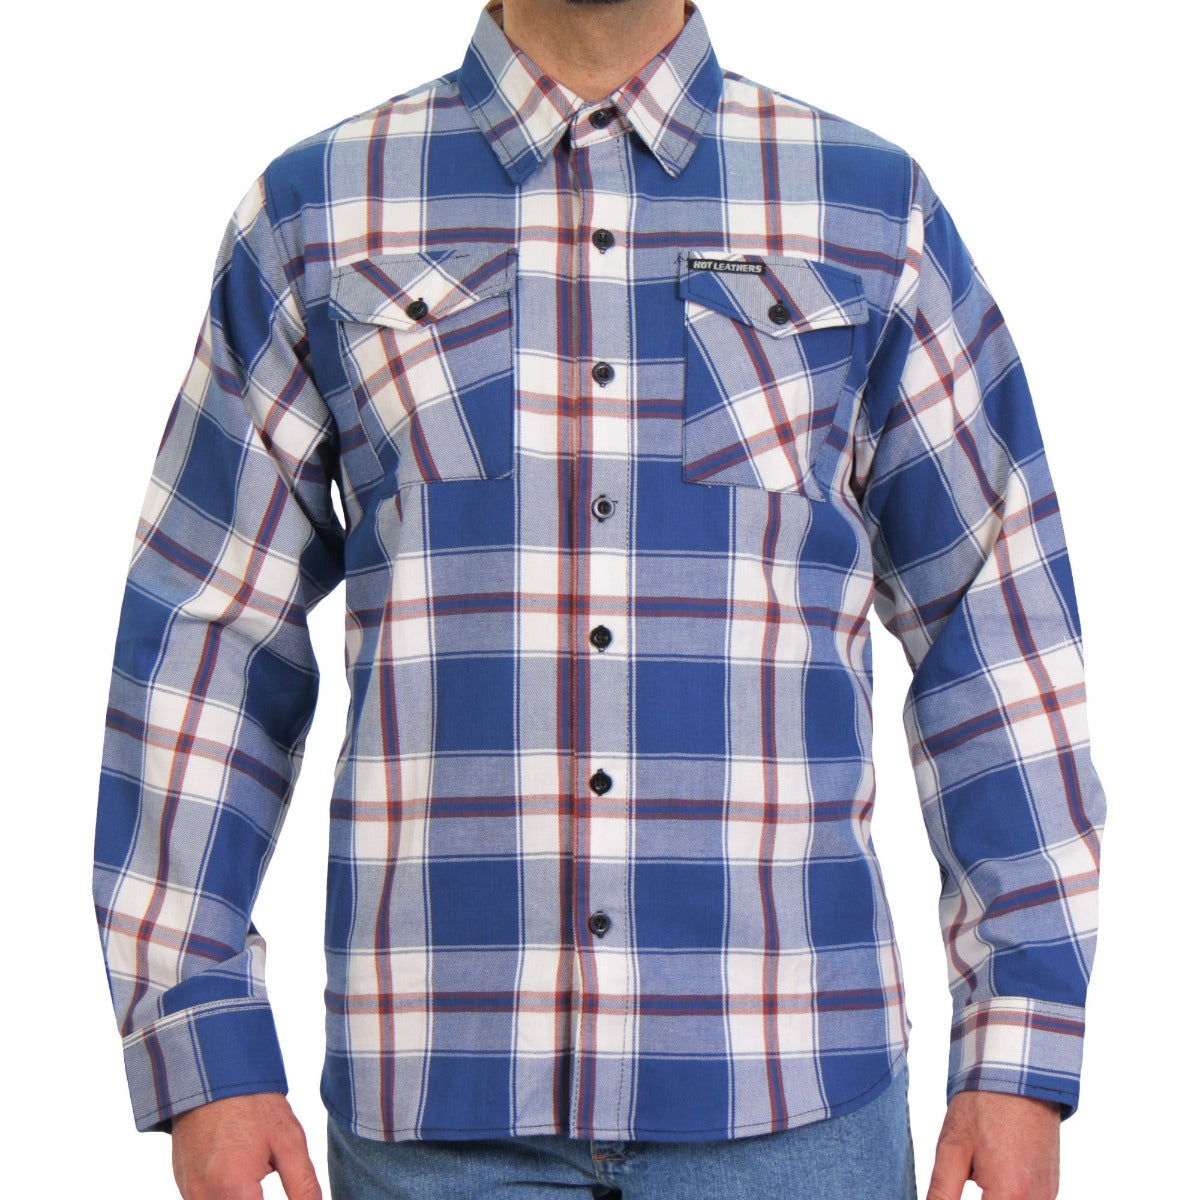 Hot Leathers Men's Blue White & Red Long Sleeve Flannel